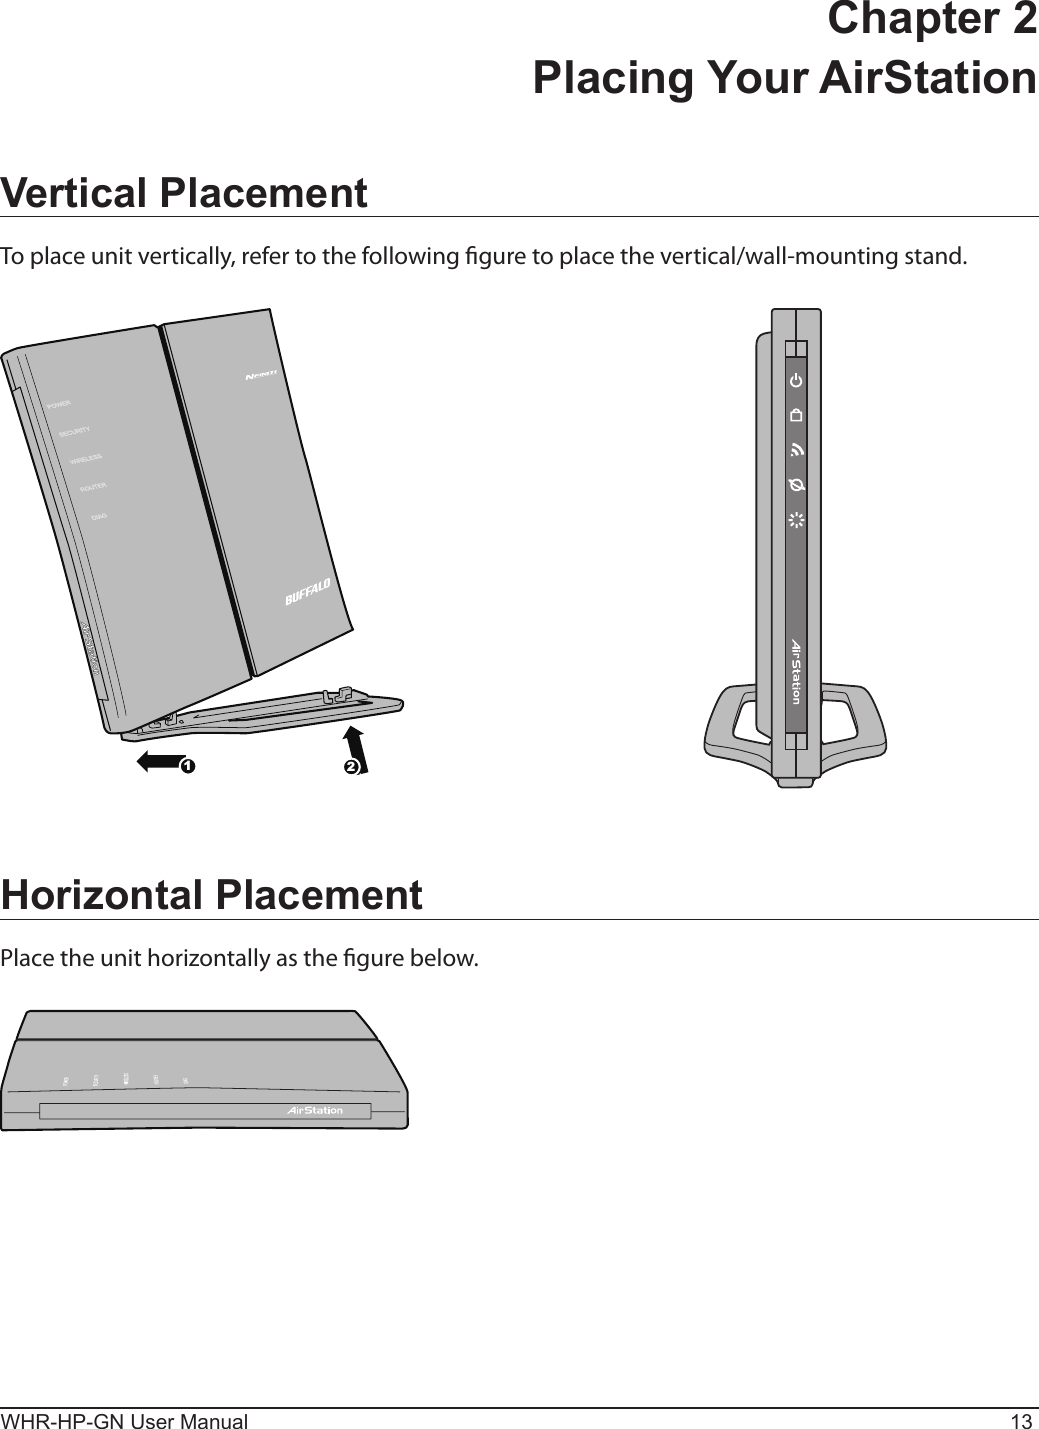 112WHR-HP-GN User Manual 13Chapter 2  Placing Your AirStationVertical PlacementTo place unit vertically, refer to the following gure to place the vertical/wall-mounting stand.Horizontal PlacementPlace the unit horizontally as the gure below.